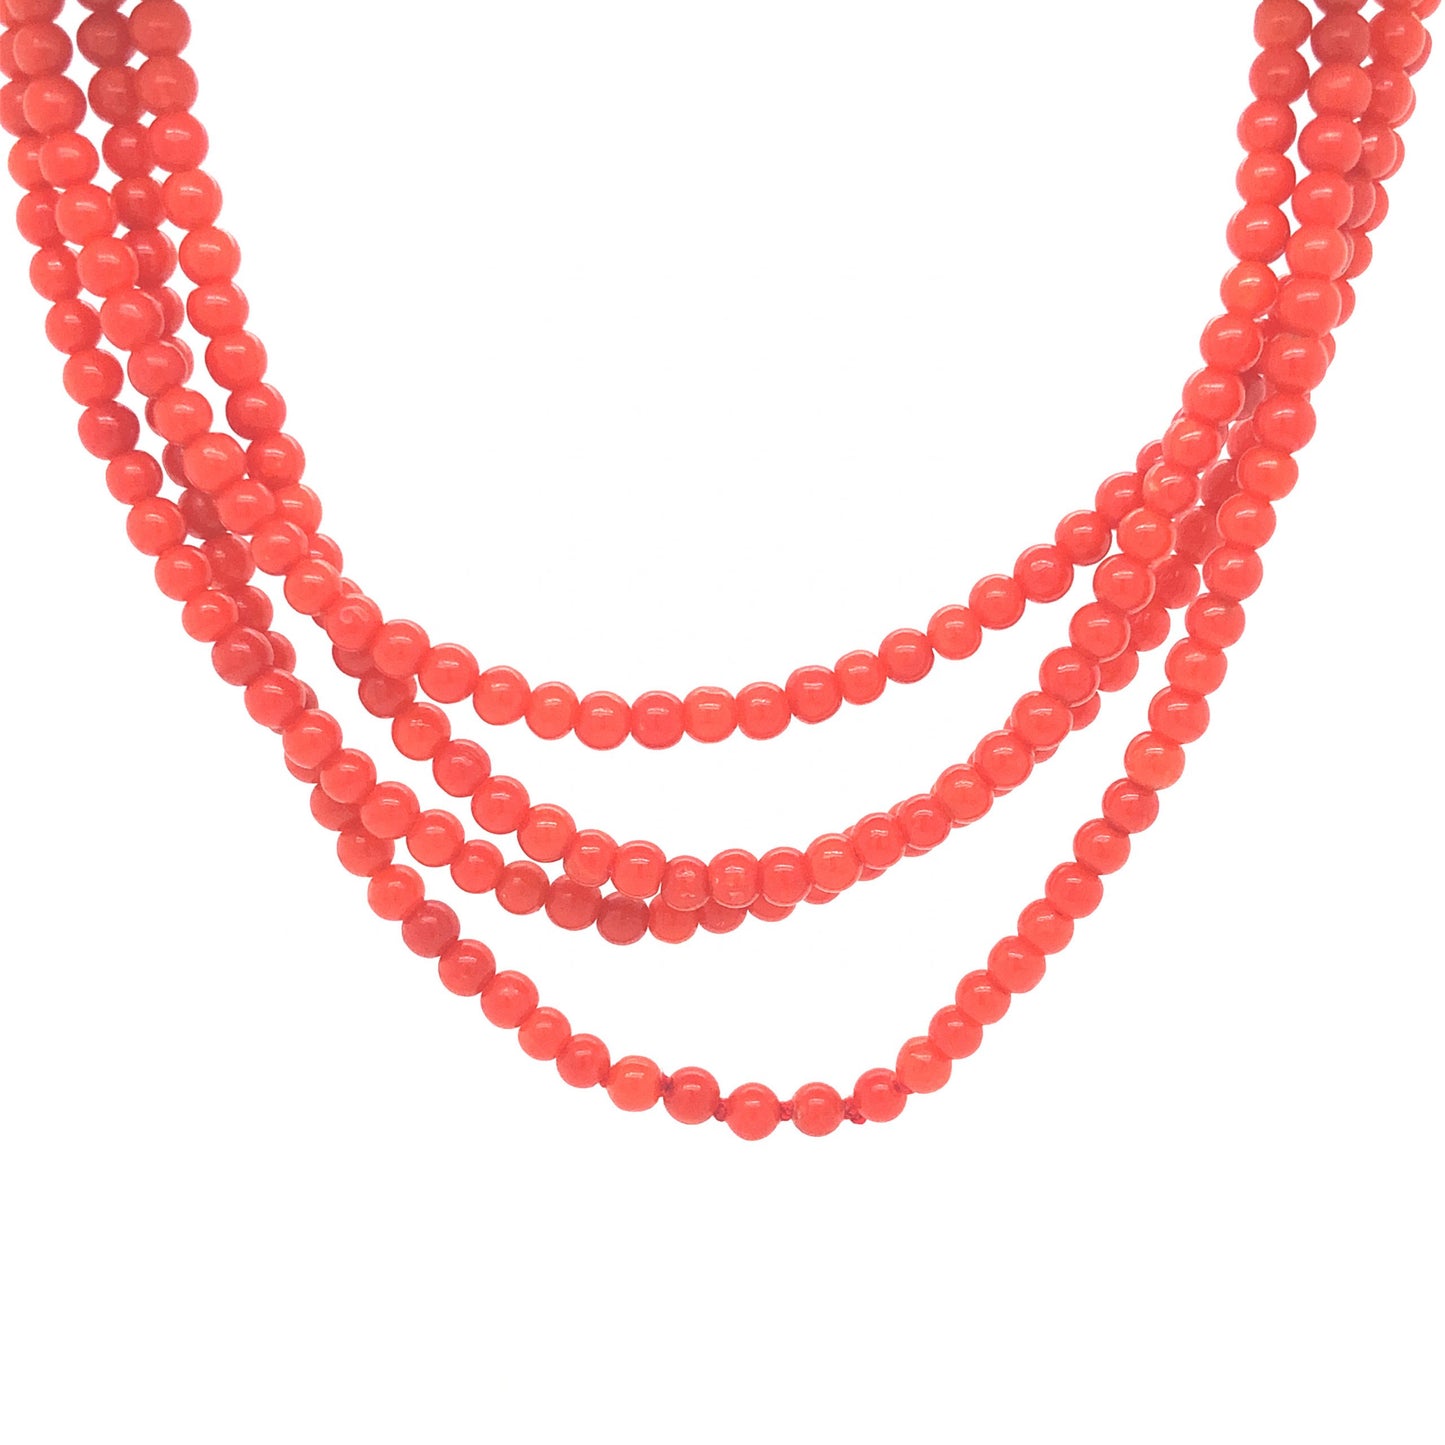 37 Inch Beaded Coral Necklace - Filigree Jewelers